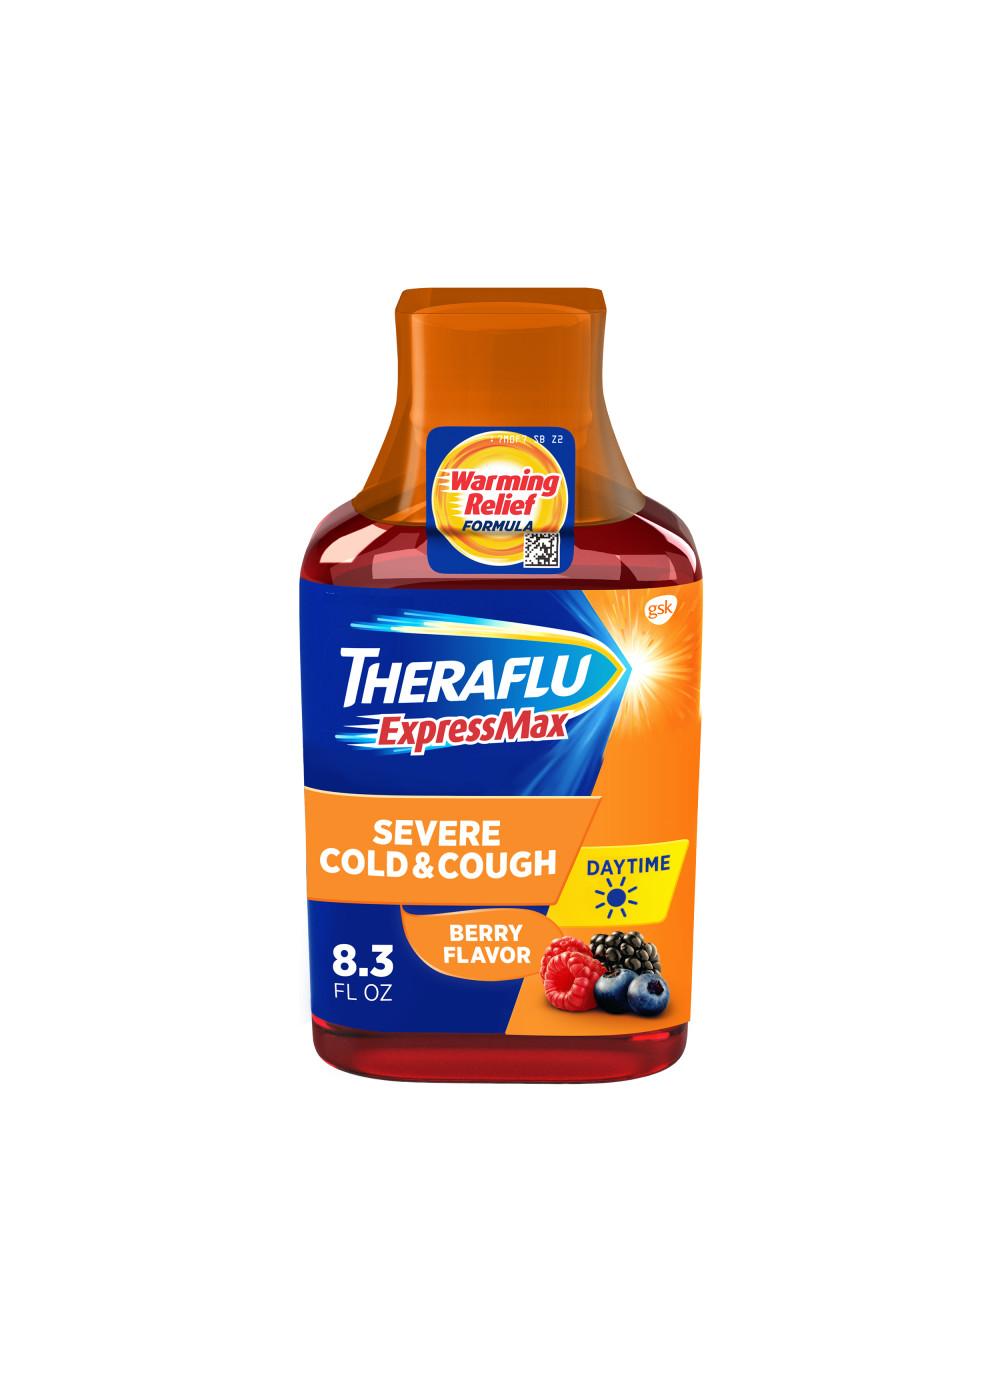 Theraflu Expressmax Daytime Severe Cold & Cough Liquid - Berry; image 1 of 10